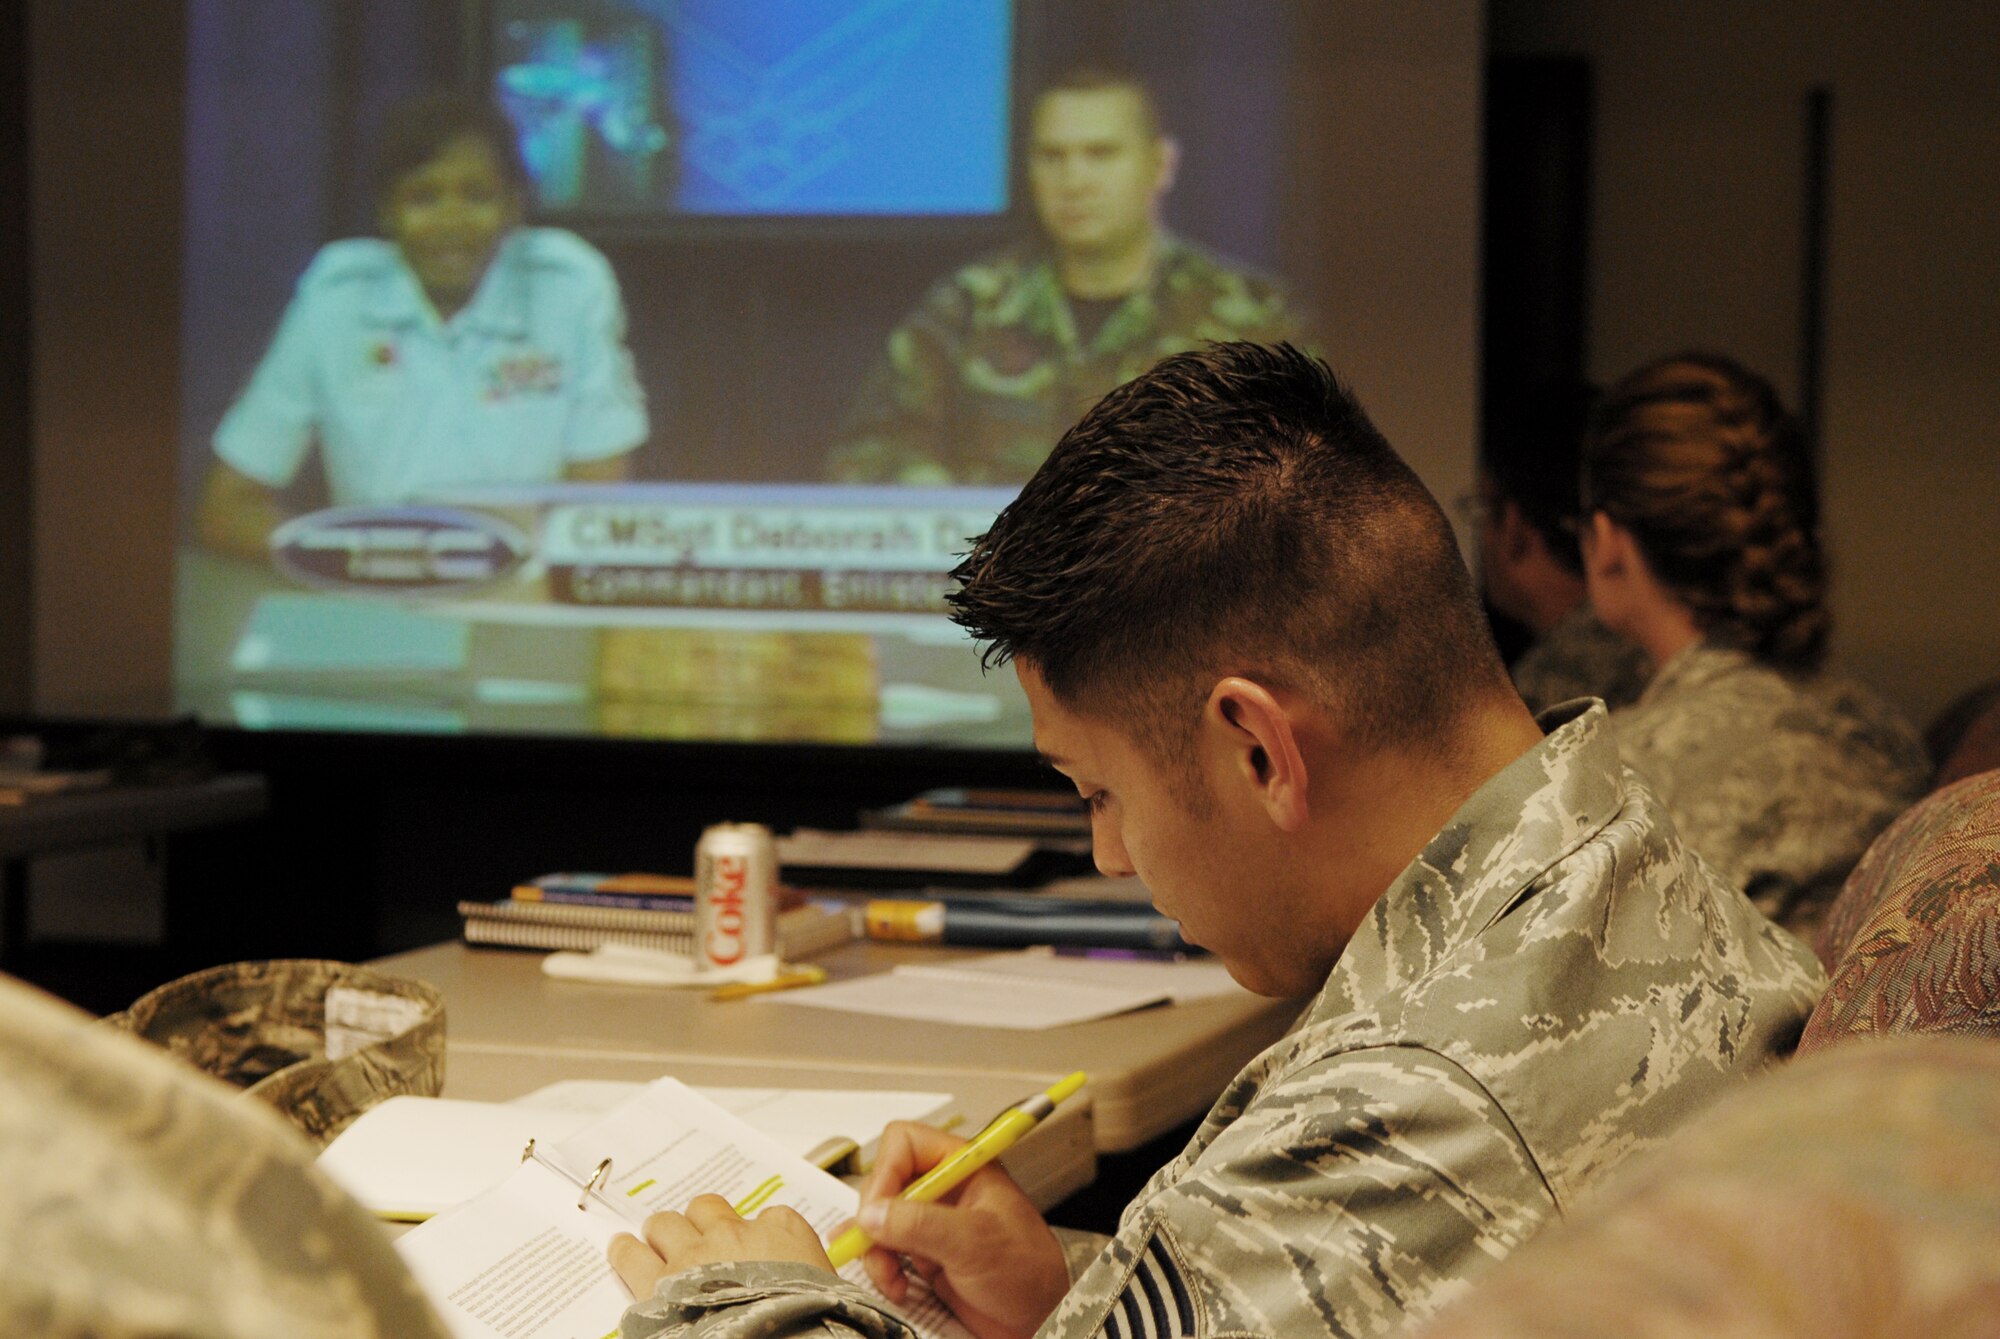 Tech. Sgt. Jesse Hernandez, a medical material technician with the Texas Air National Guard’s 149th Fighter Wing, highlights key points contained in a satellite NCO Academy training manual while listening to Chief Master Sgt. Deborah F. Davidson, commandant of Enlisted Professional Military Education for the Air National Guard, via satellite connection, at Lackland Air Force Base, Texas, on Sept. 10, 2009. (U.S. Air Force photo by Staff Sgt. Eric L. Wilson)(RELEASED).